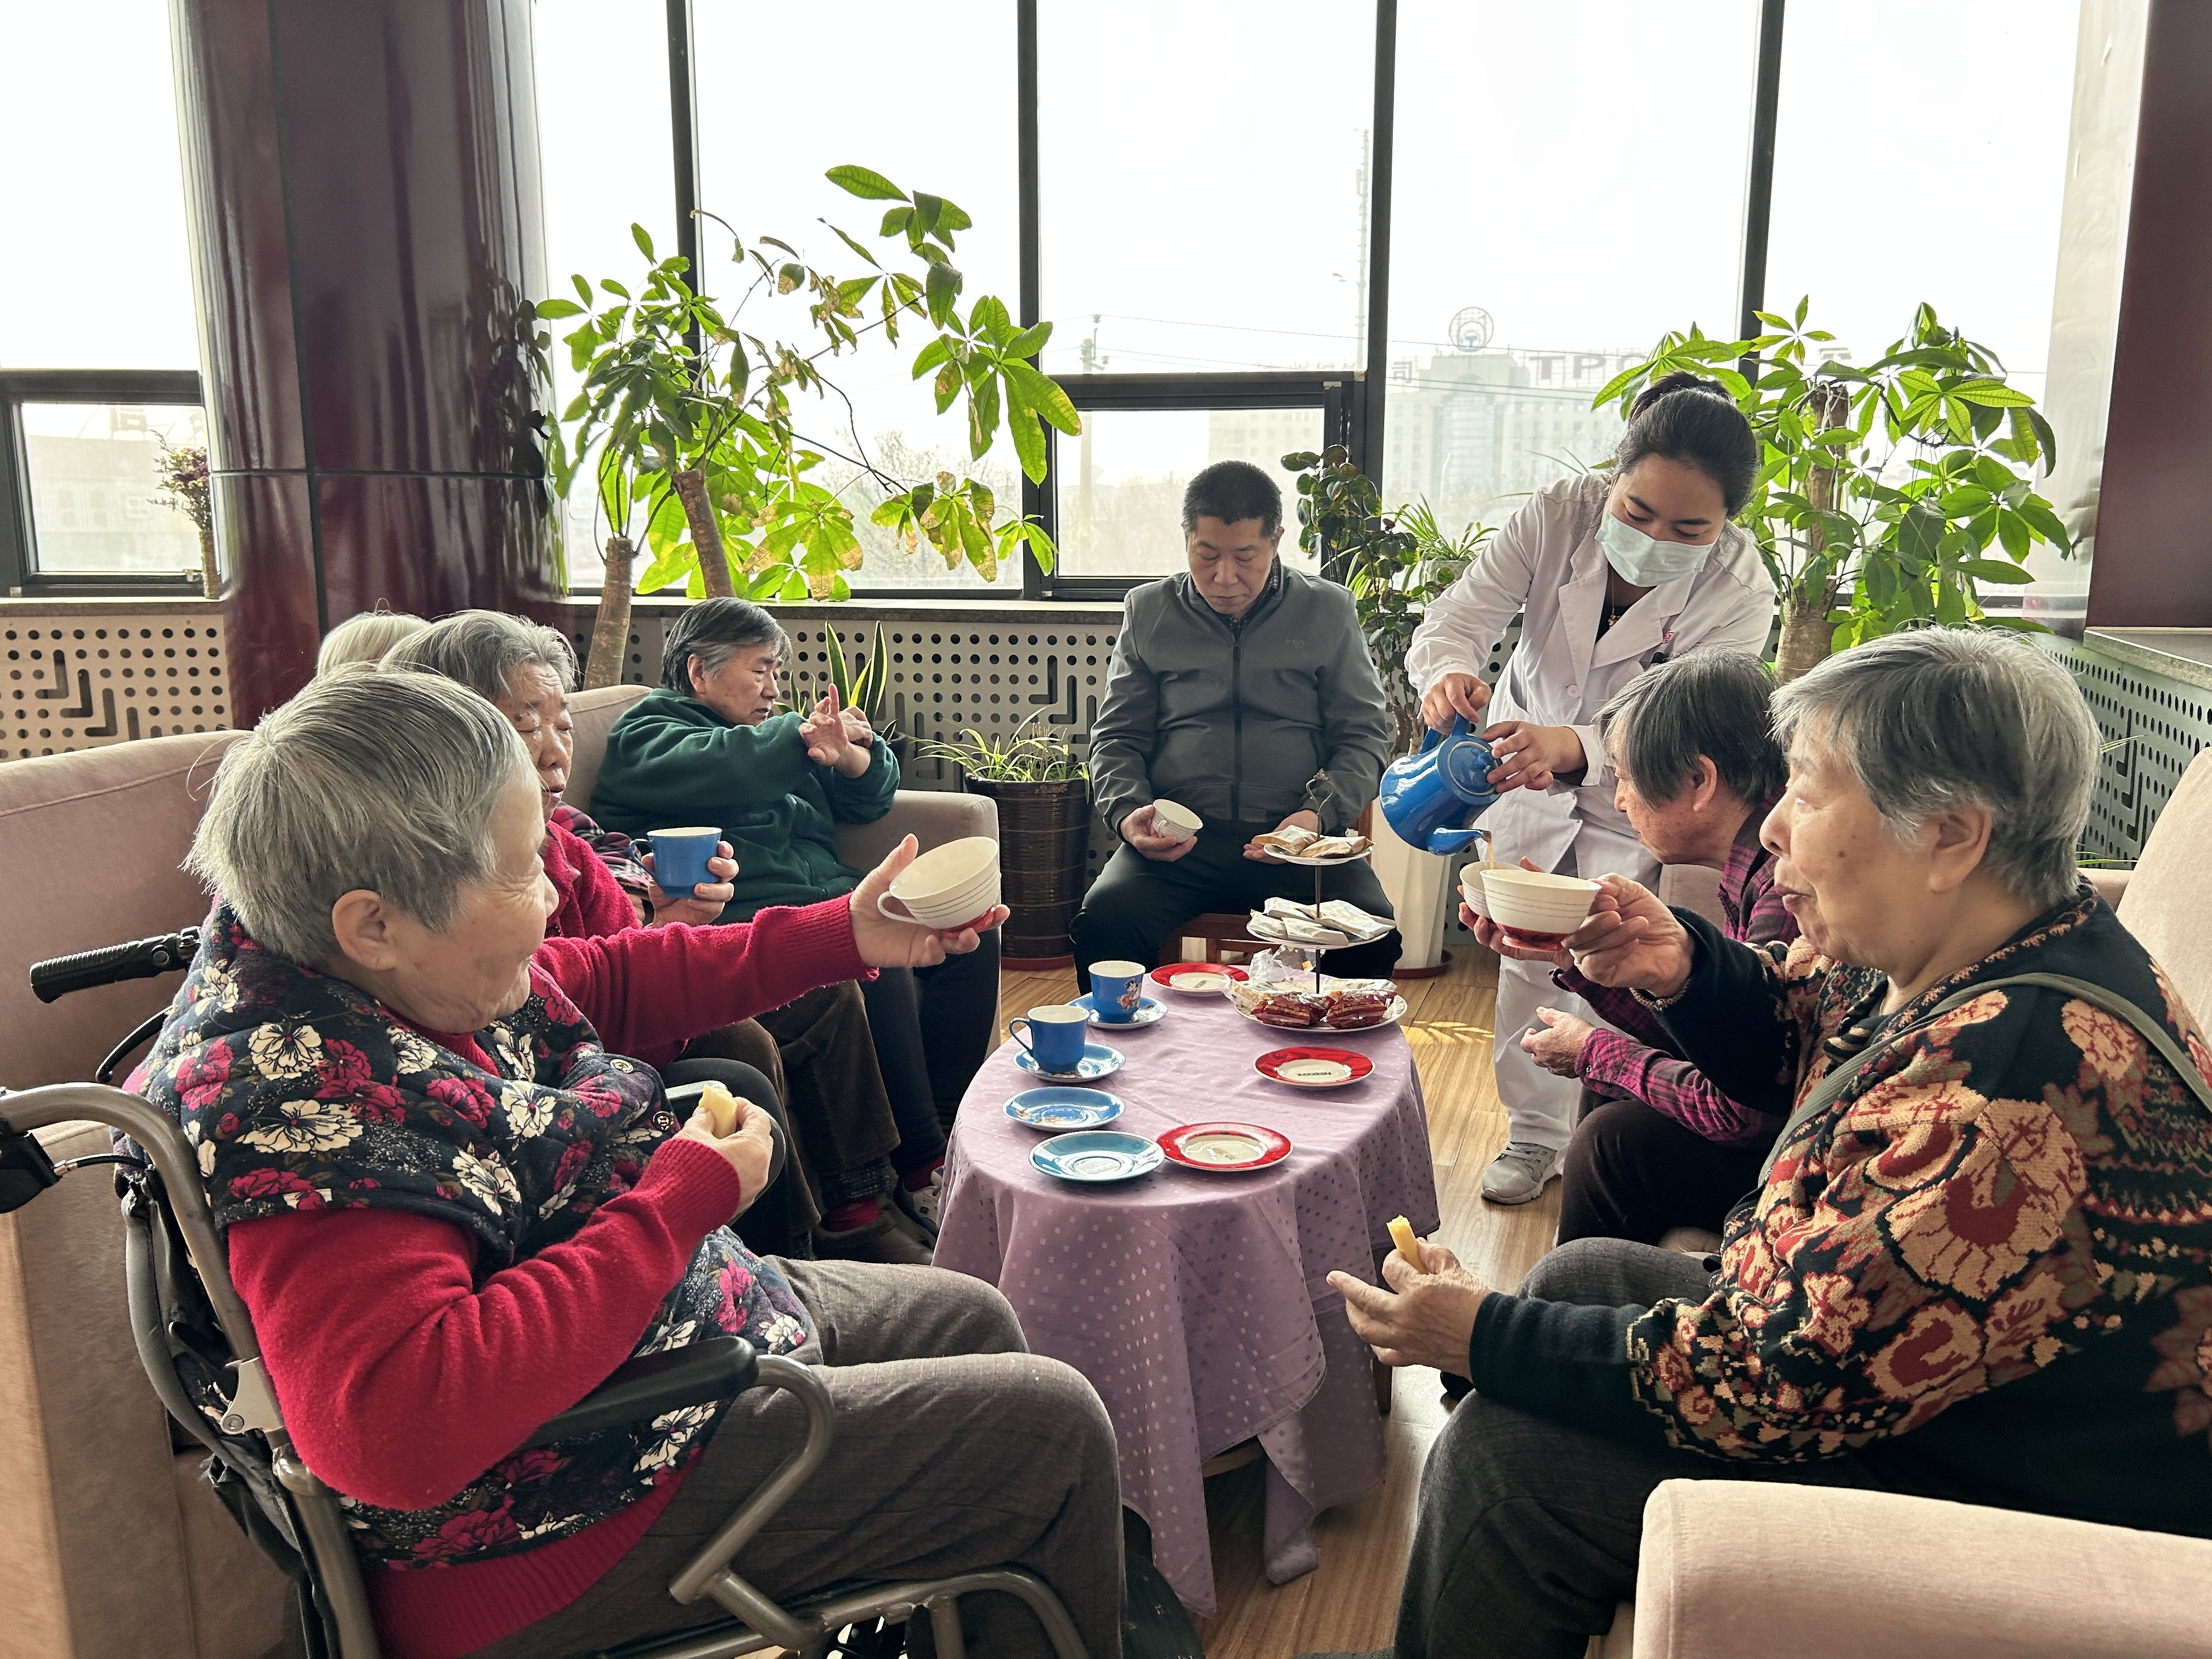 The scientists say their finding could deepen understanding of the ageing process and help researchers find ways to intervene. Photo: Xinhua